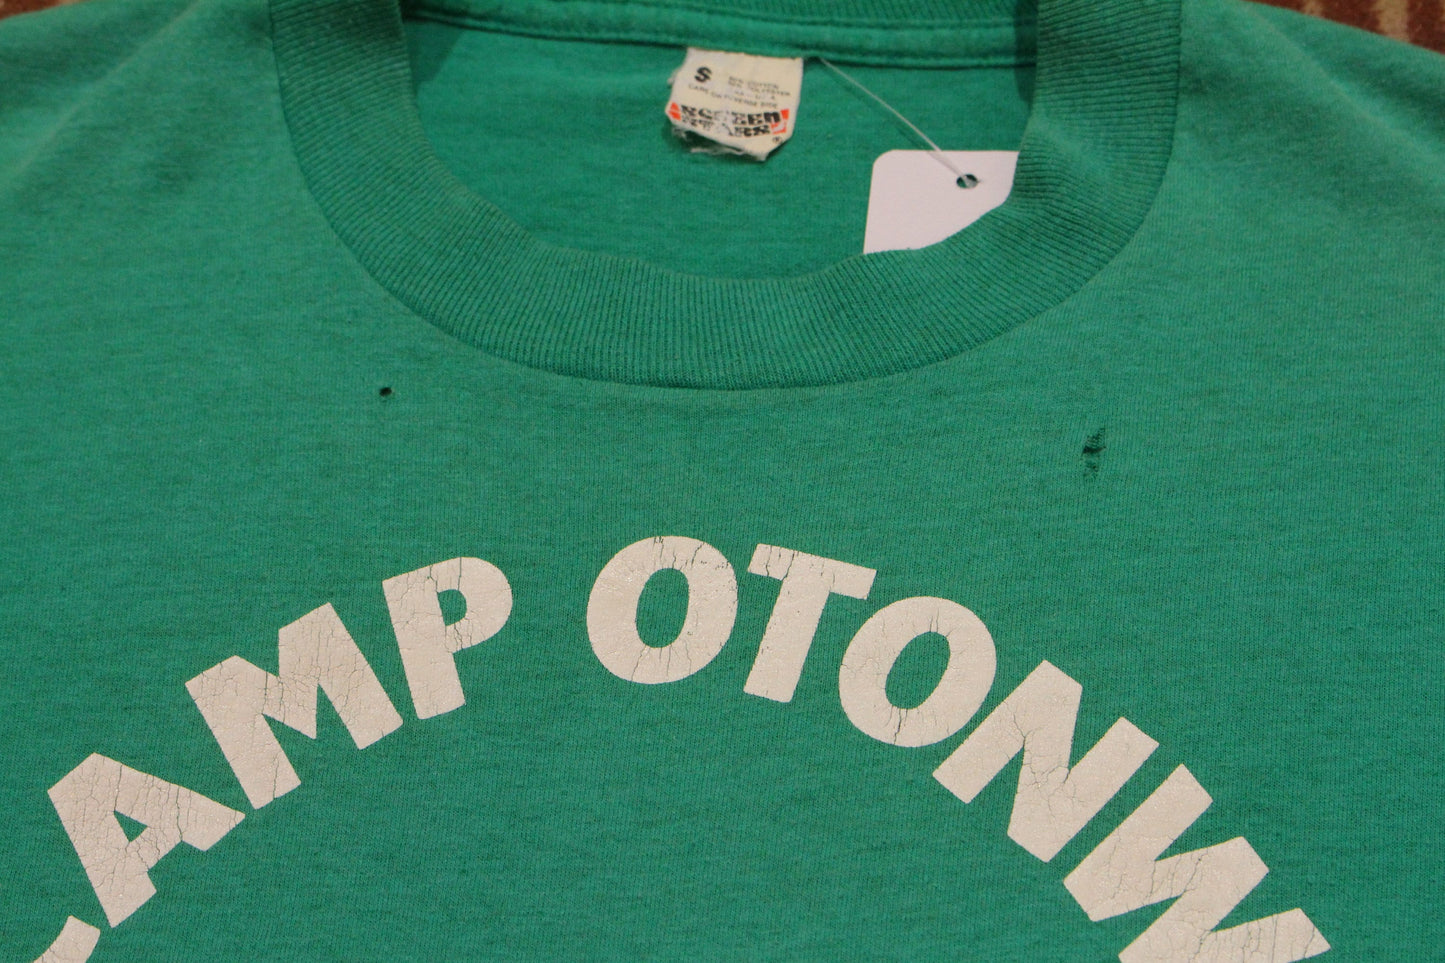 1980s Screen Stars Camp Otonwe Day Camp Westerville Ohio T-Shirt Made in USA Size XS